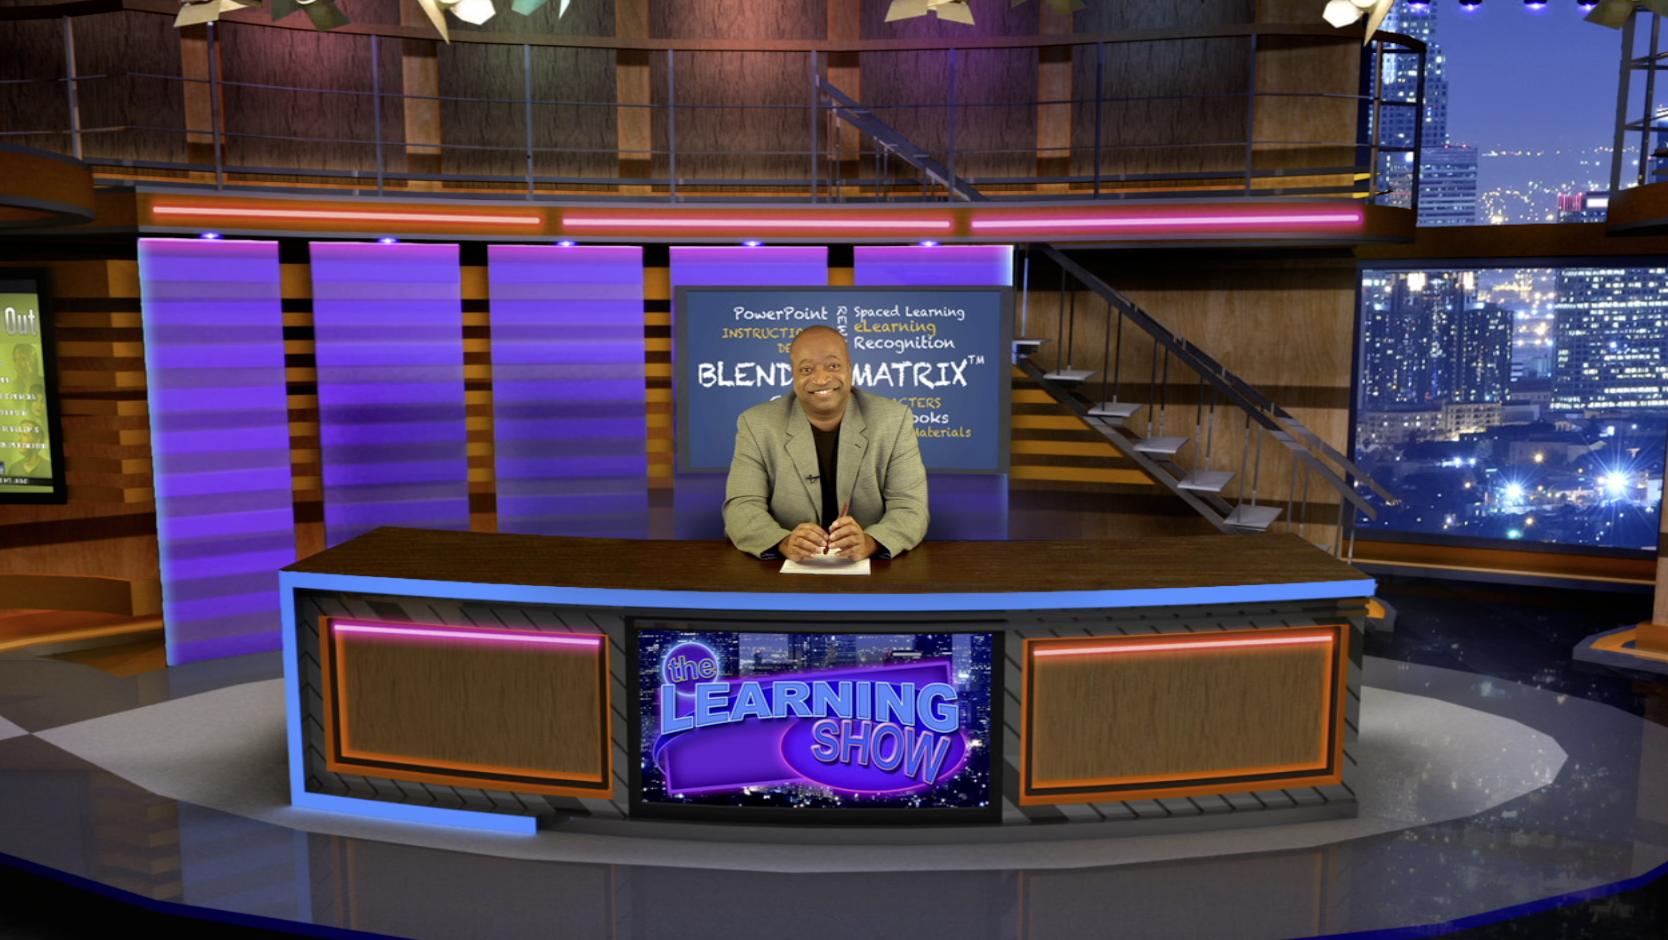 The Learning Show